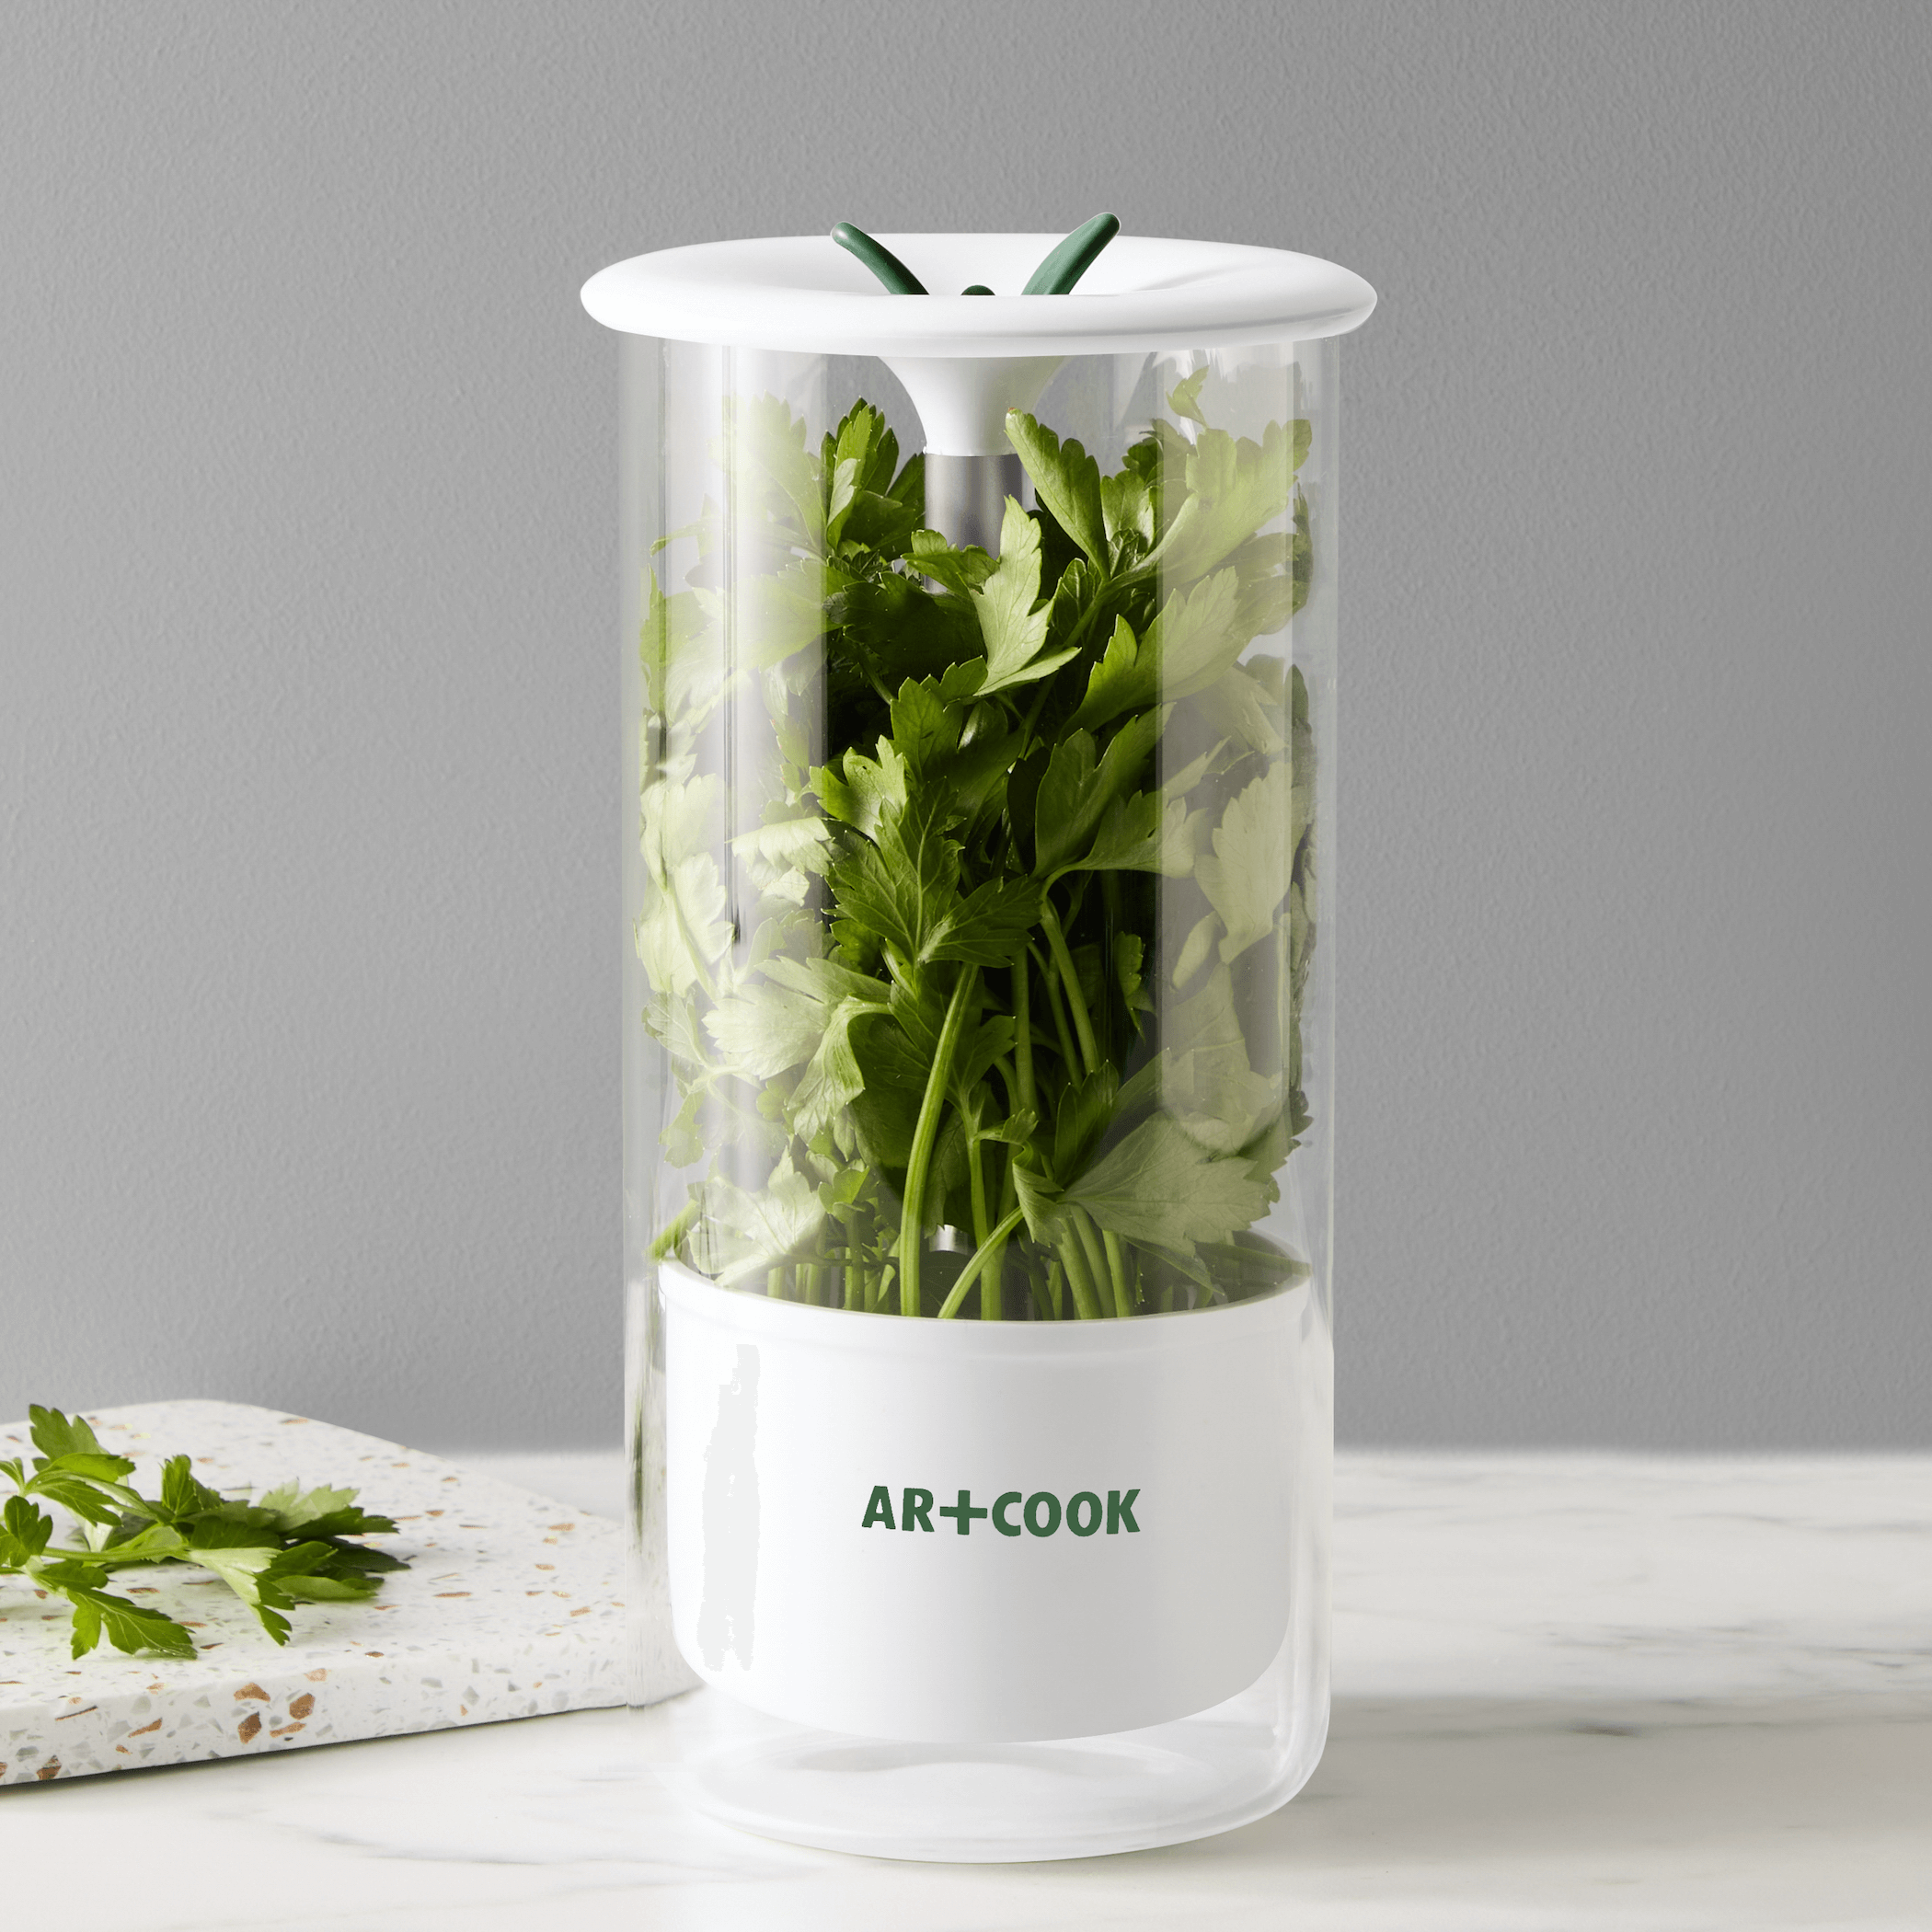  Fresh Produce Saver Containers with Herb Keeper and